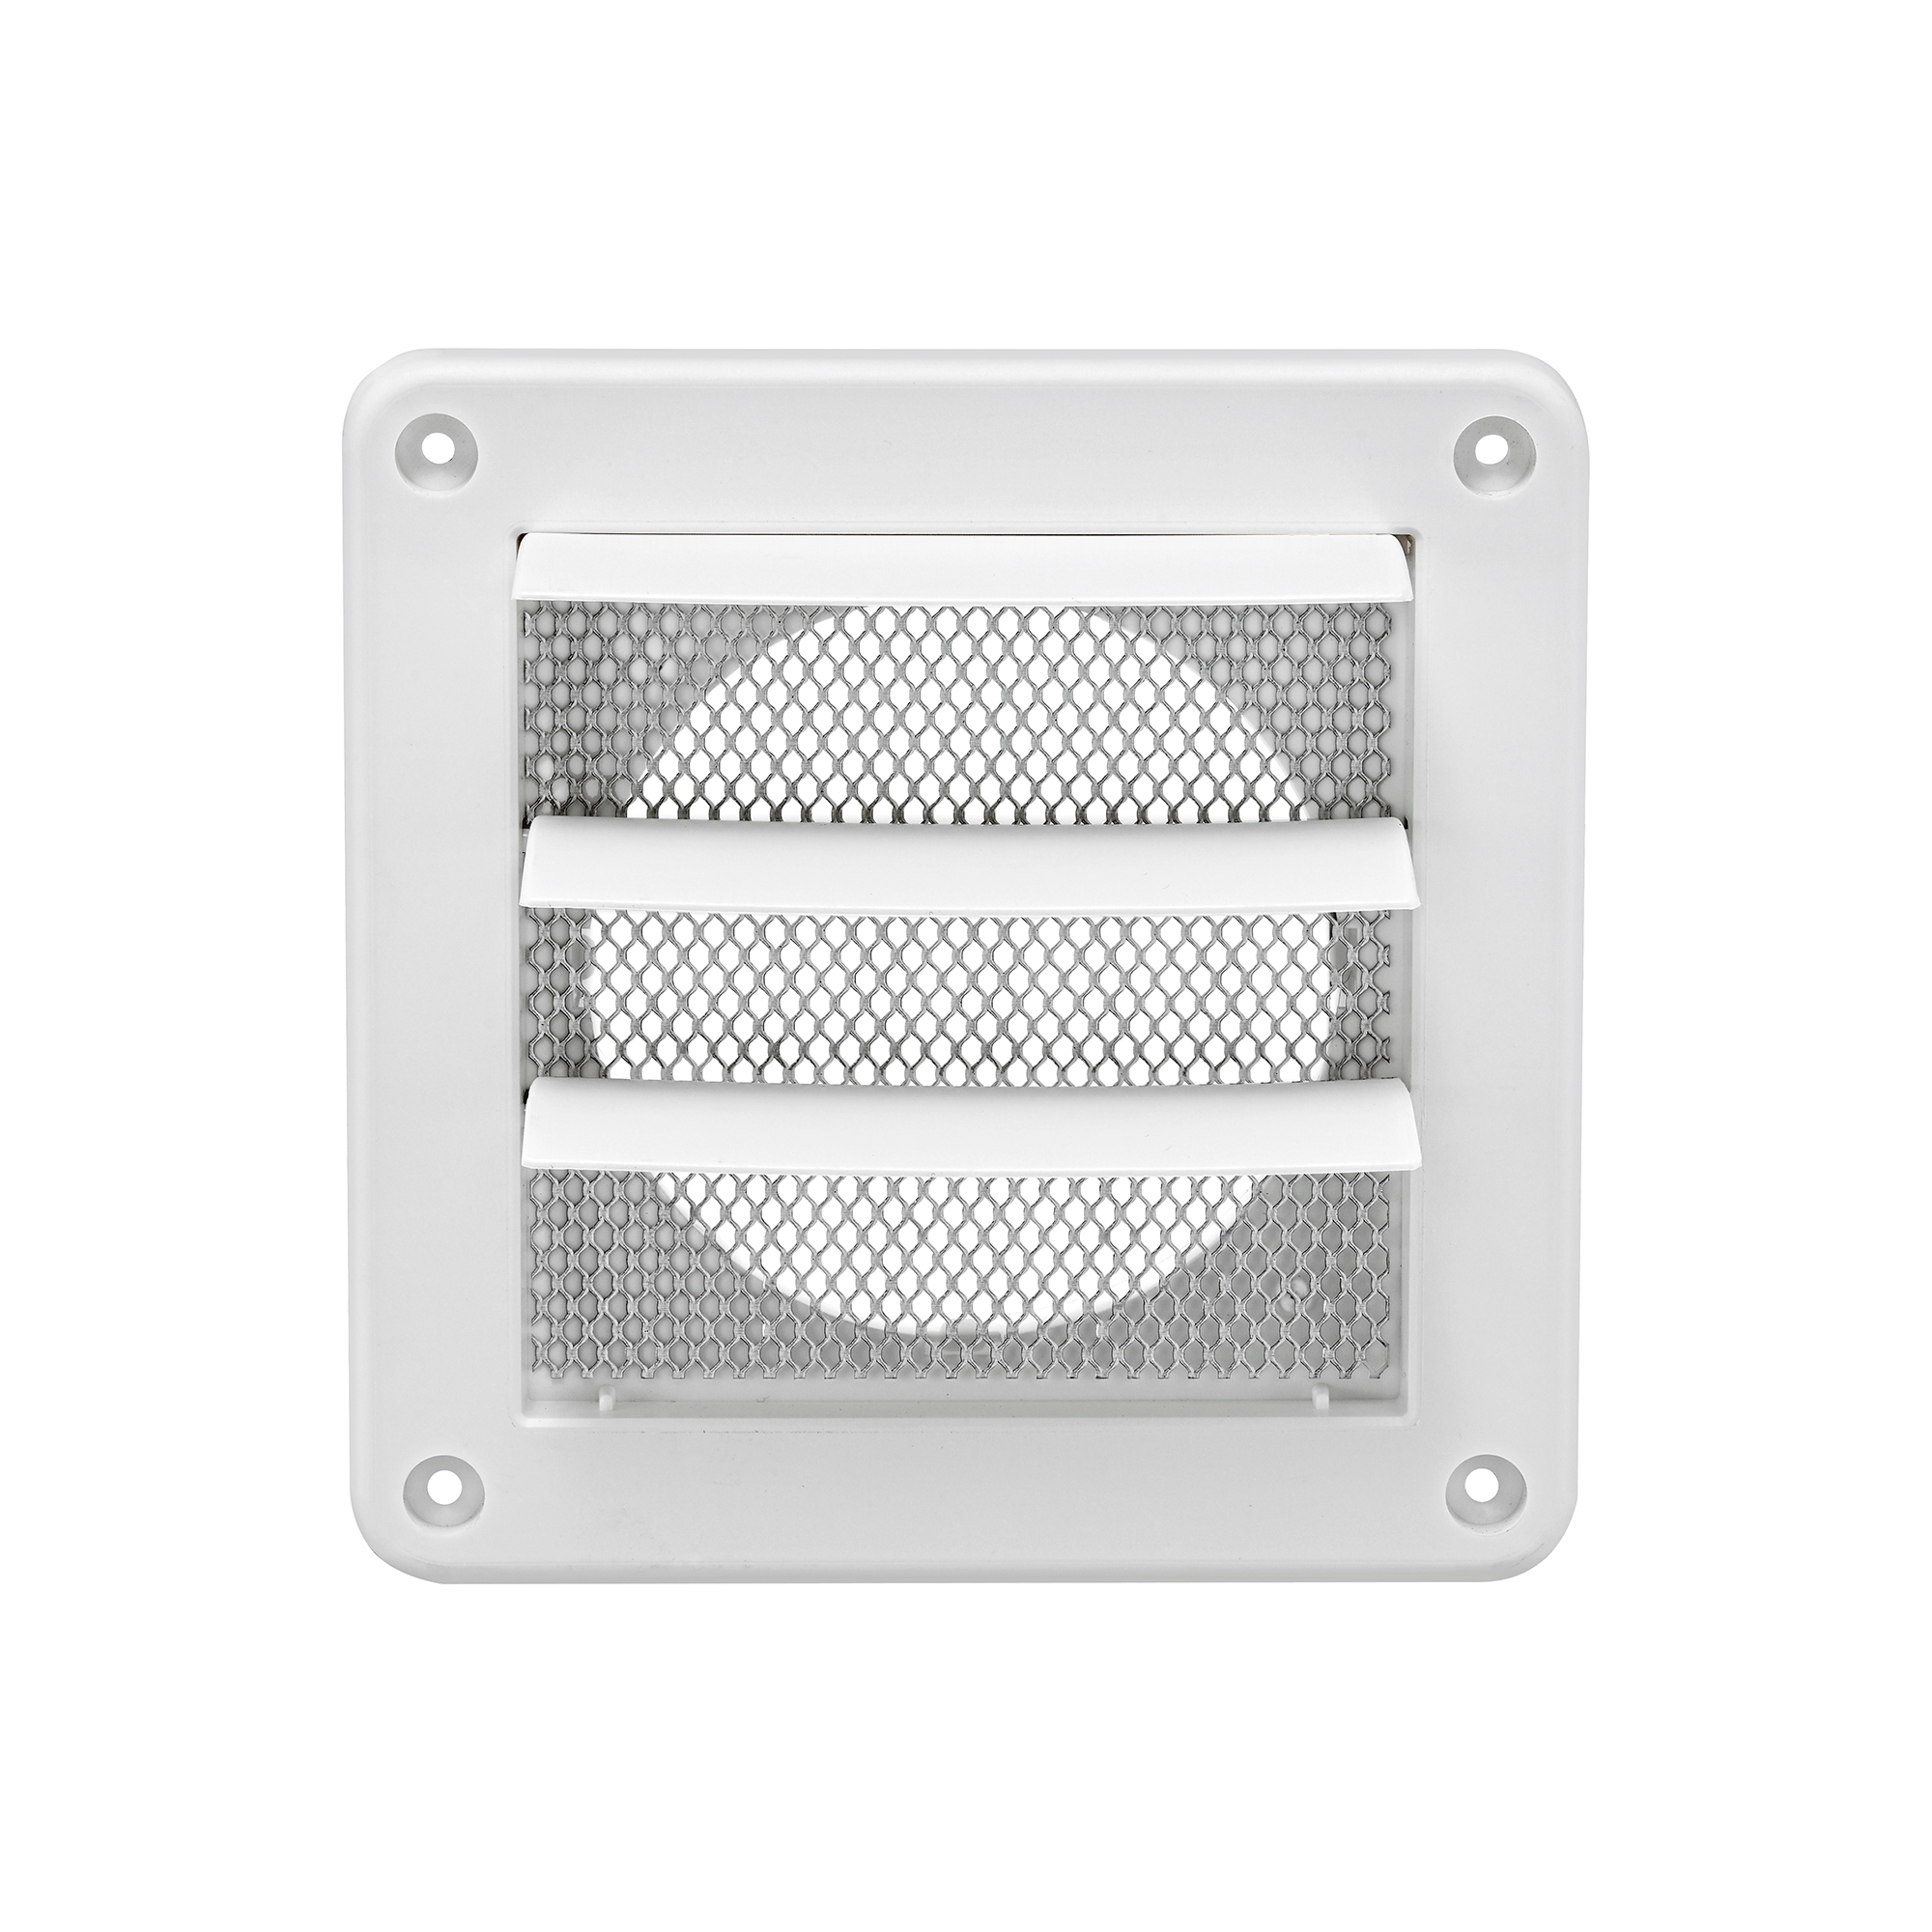 4 inch White Plastic Exhaust Vent (Louvered) - Metal Bug Screen - Front